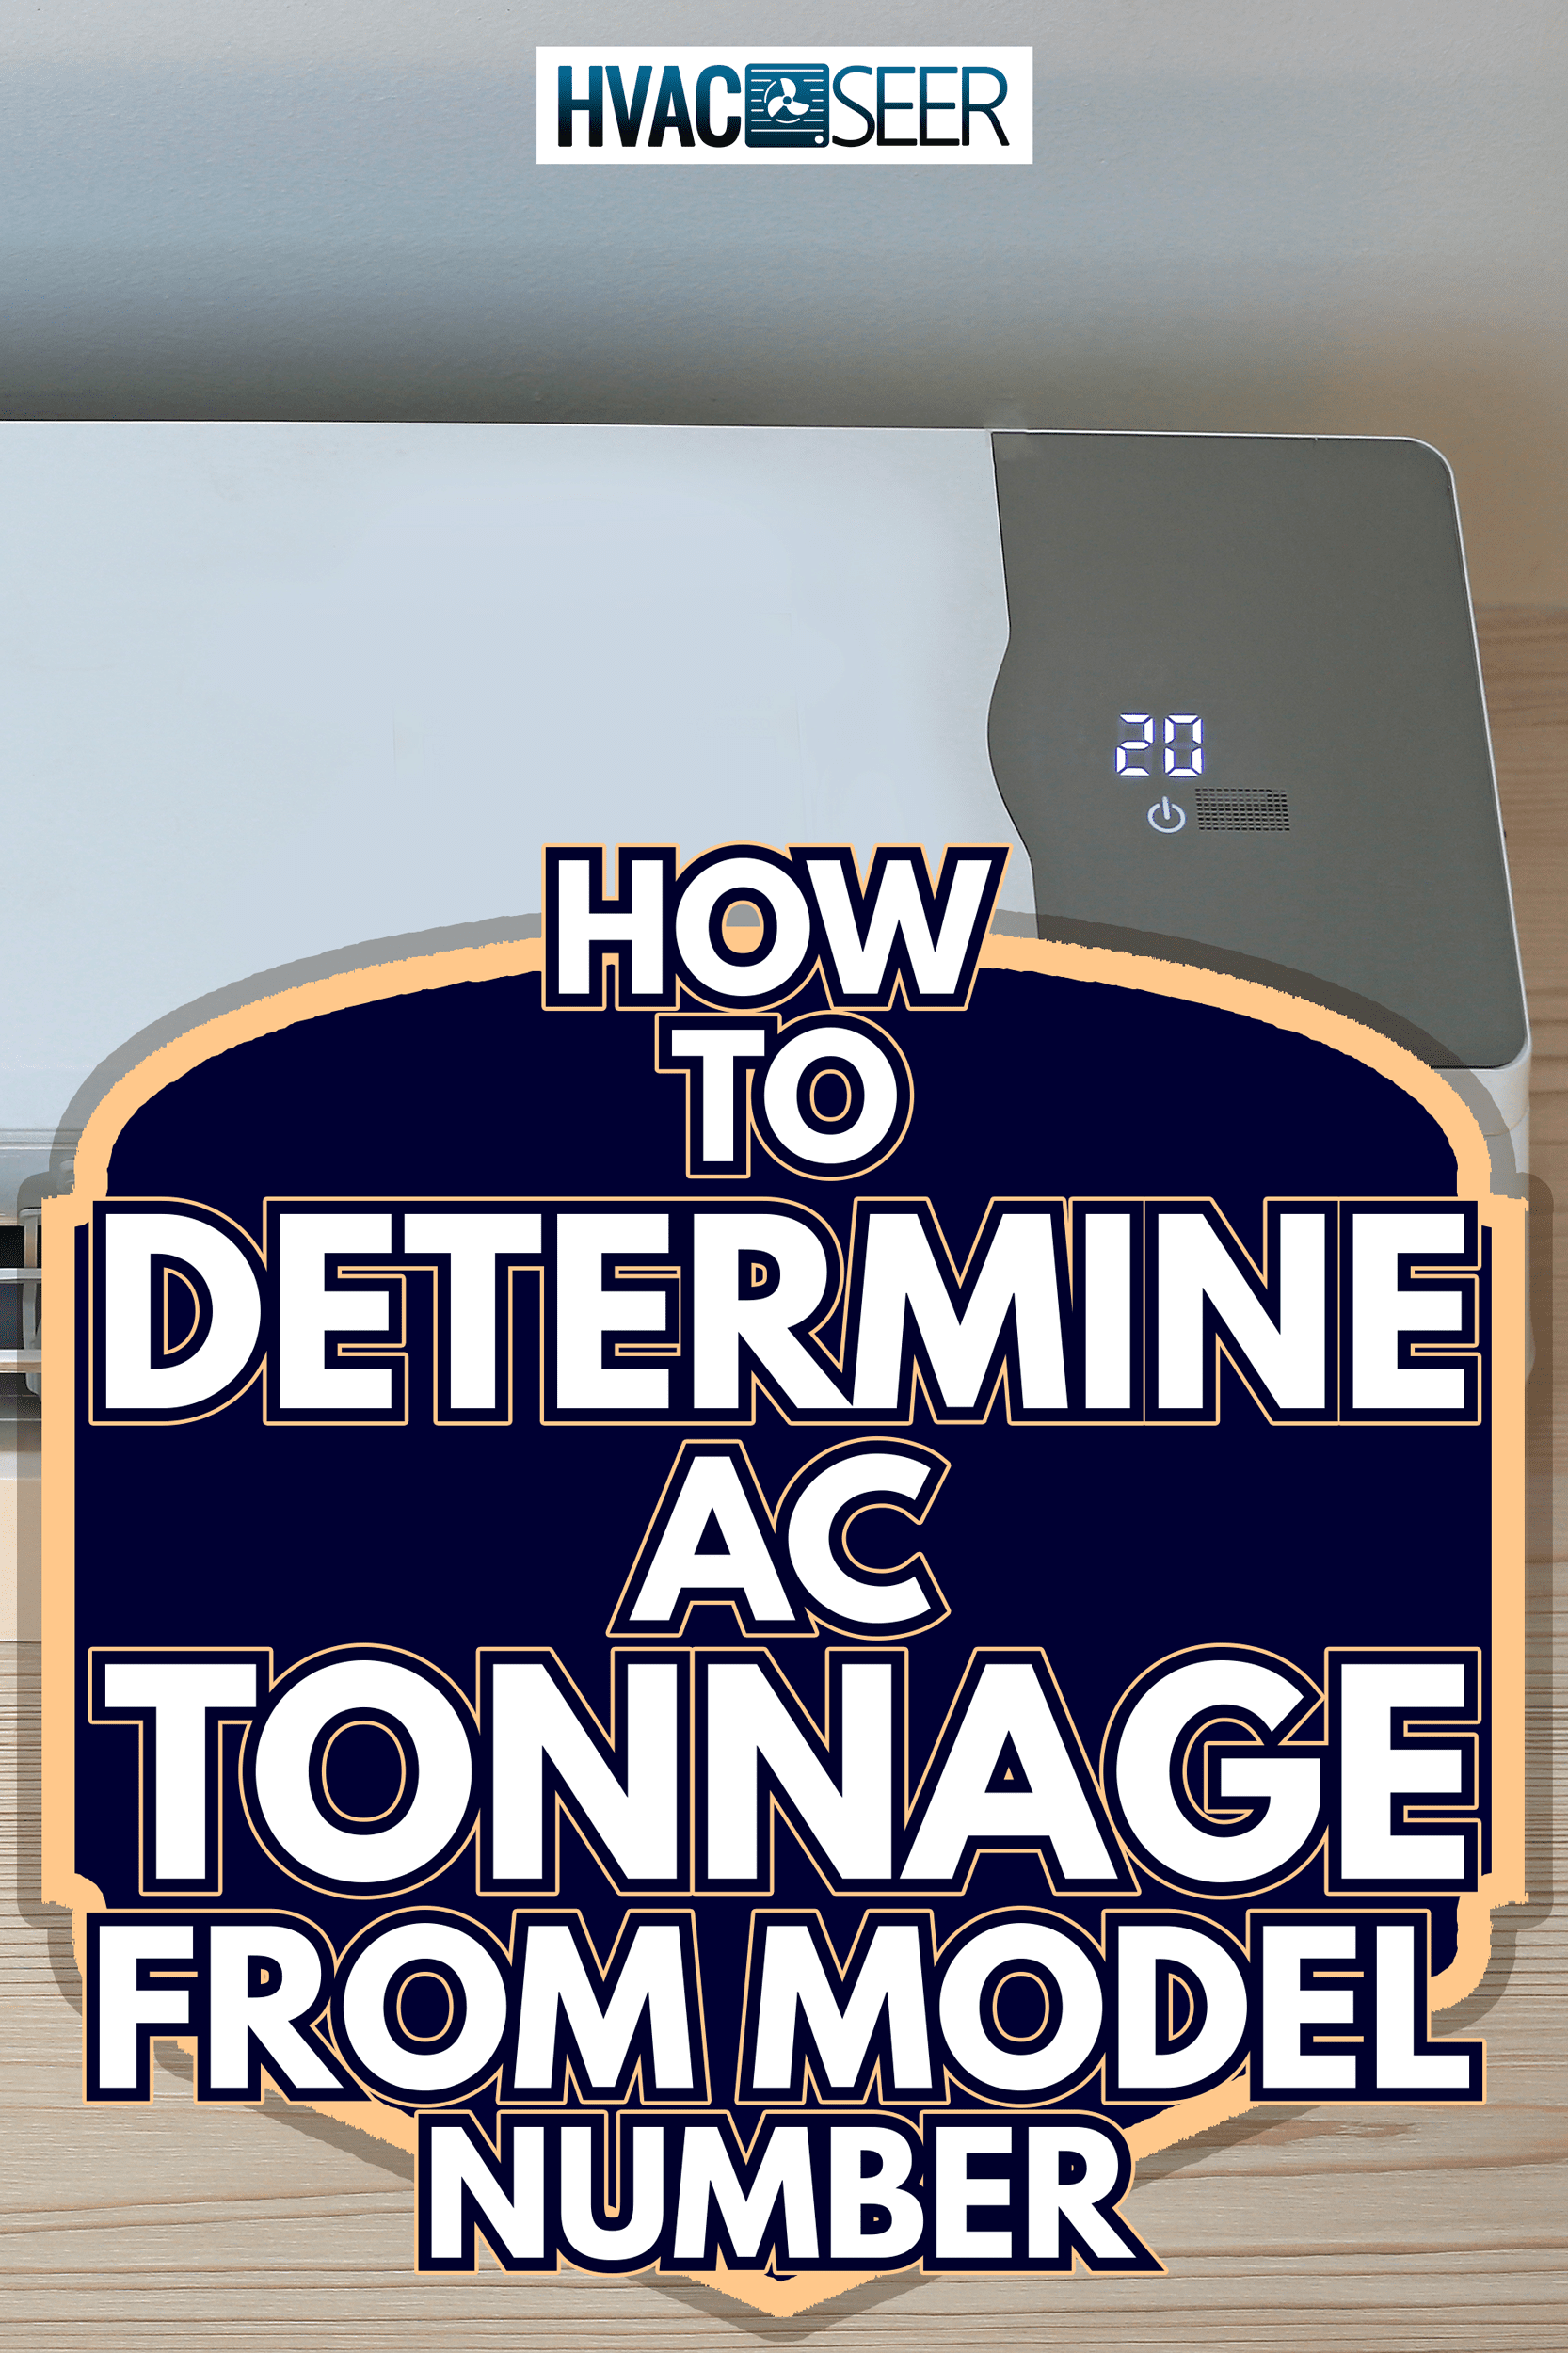 Air conditioner on wall - How To Determine AC Tonnage From Model Number